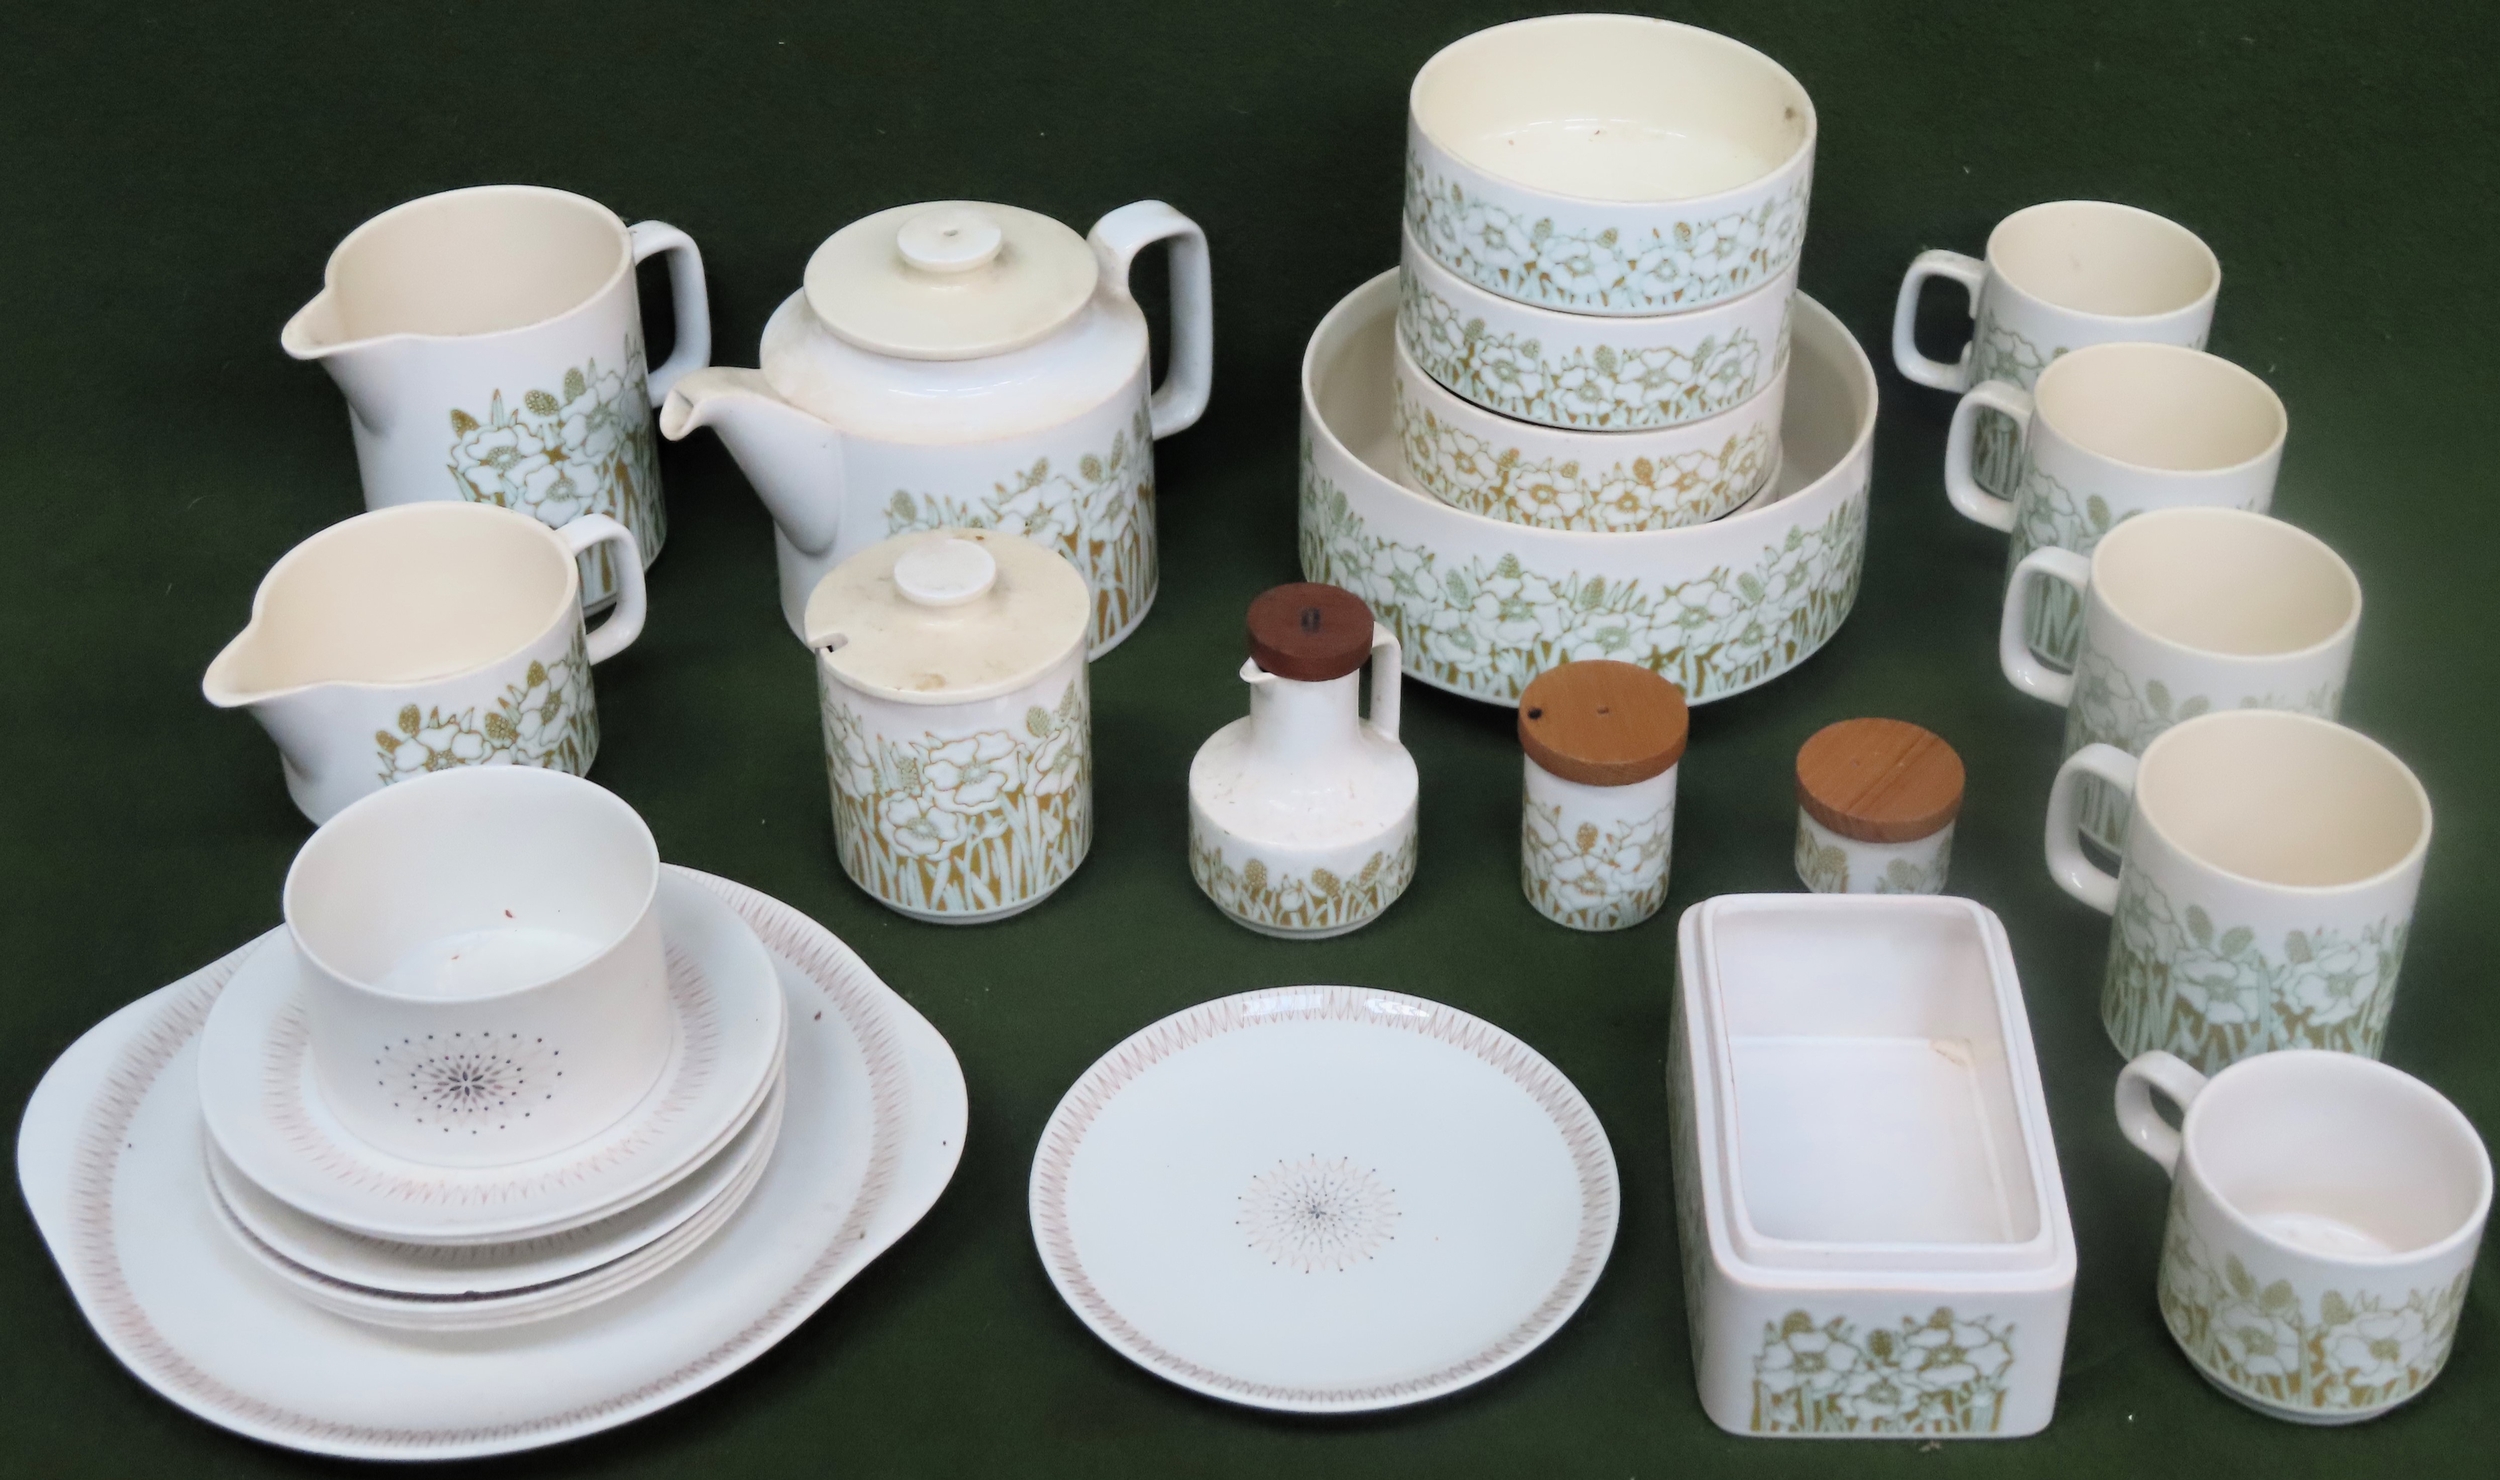 Quantity of Hornsea 'Fleur' china, plus Royal Doulton 'Morning Star' all used and unchecked